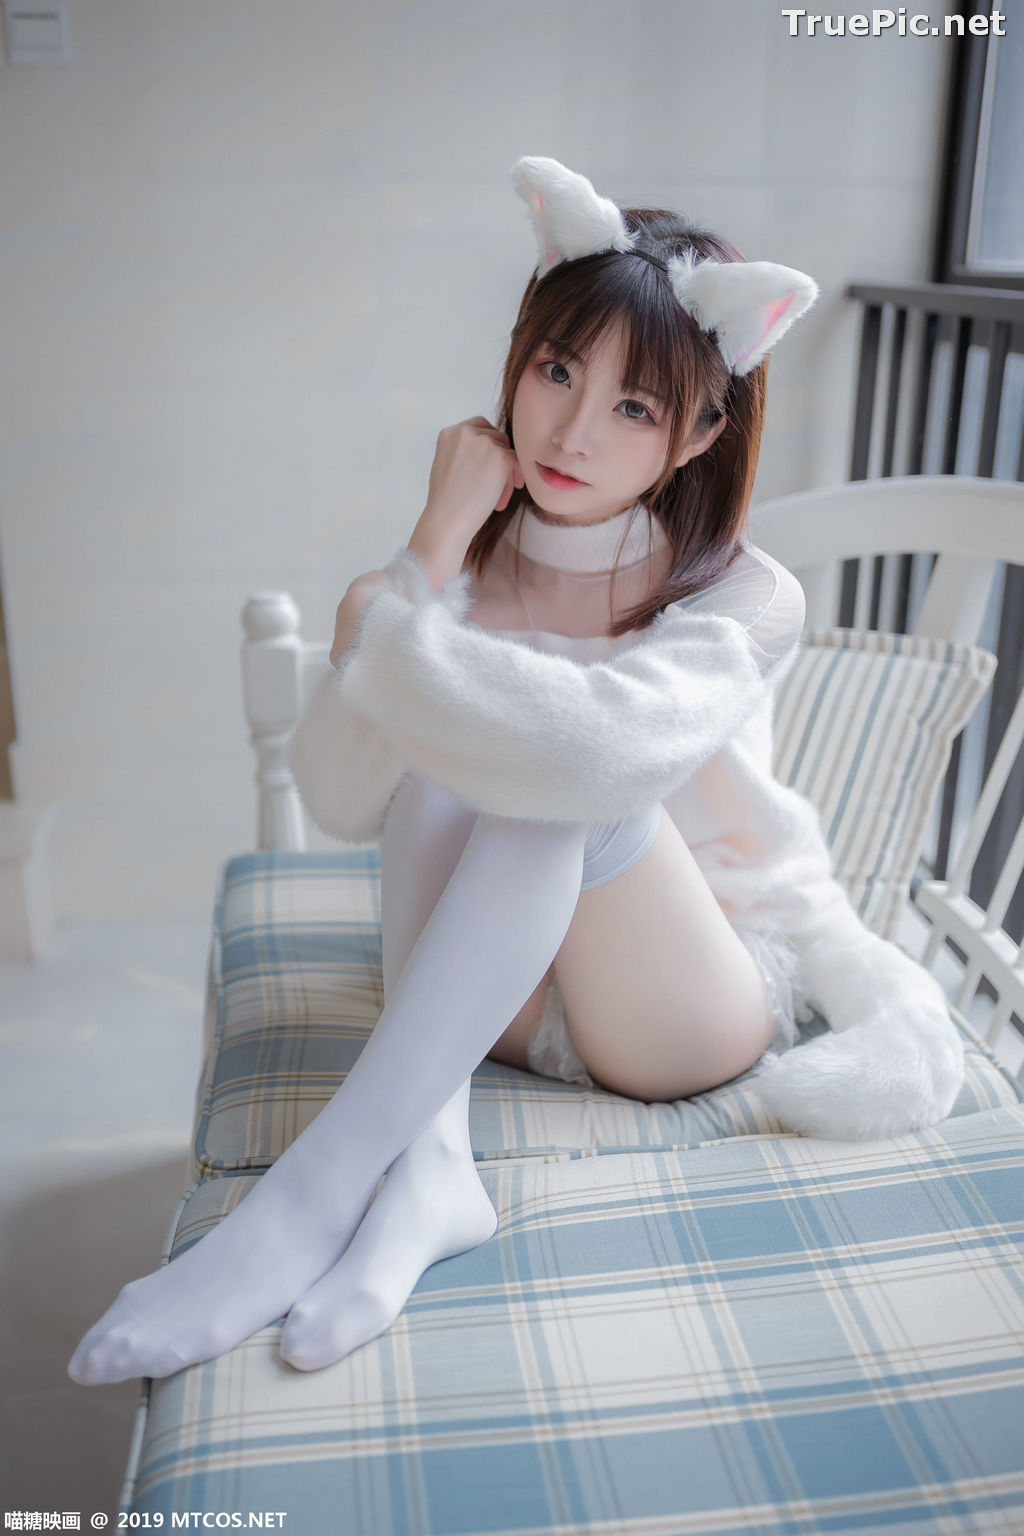 Image [MTCos] 喵糖映画 Vol.027 – Chinese Cute Model – Beautiful White Cat - TruePic.net - Picture-37